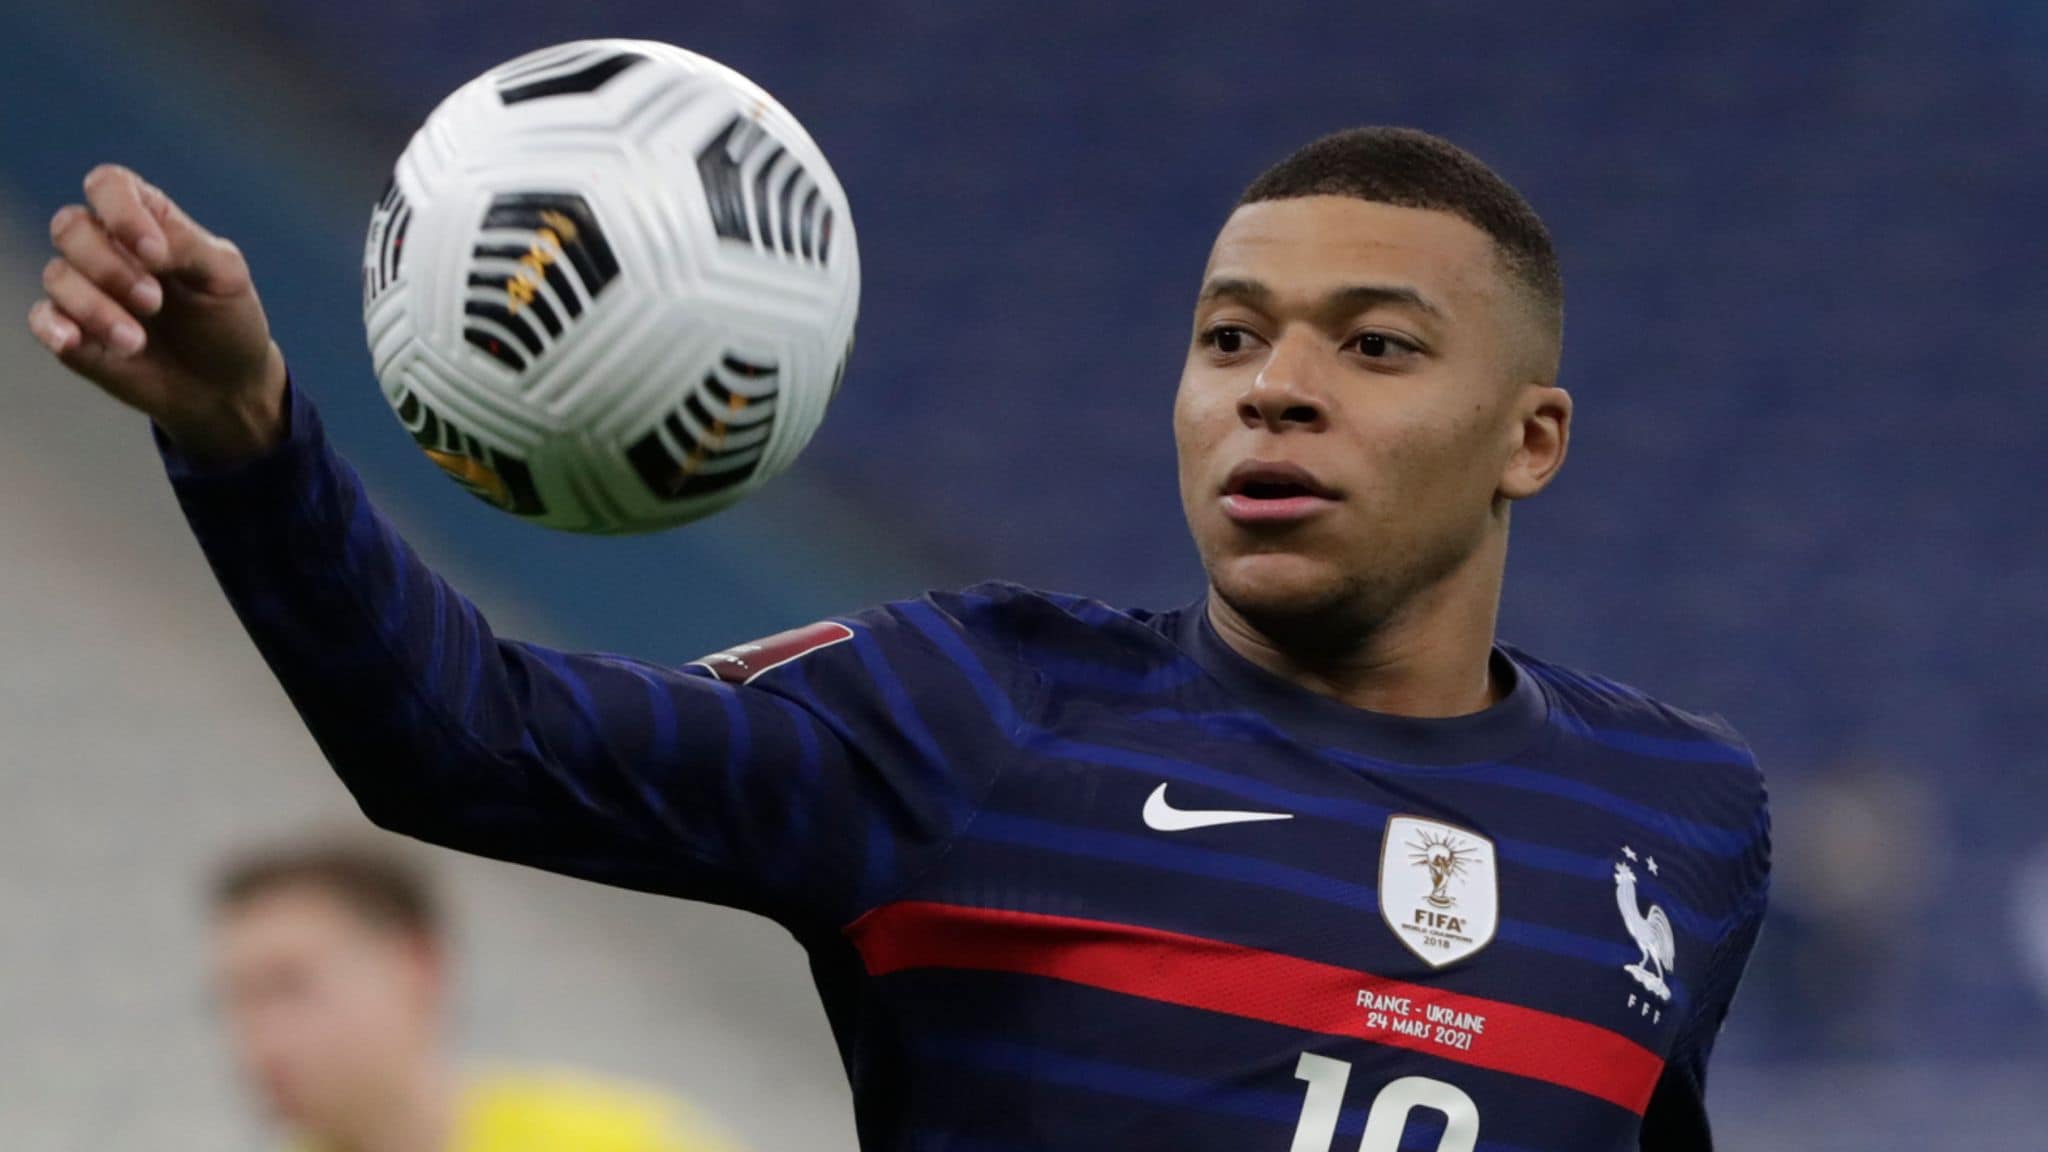 Kylian Mbappé’s Salary and Net worth in 2021